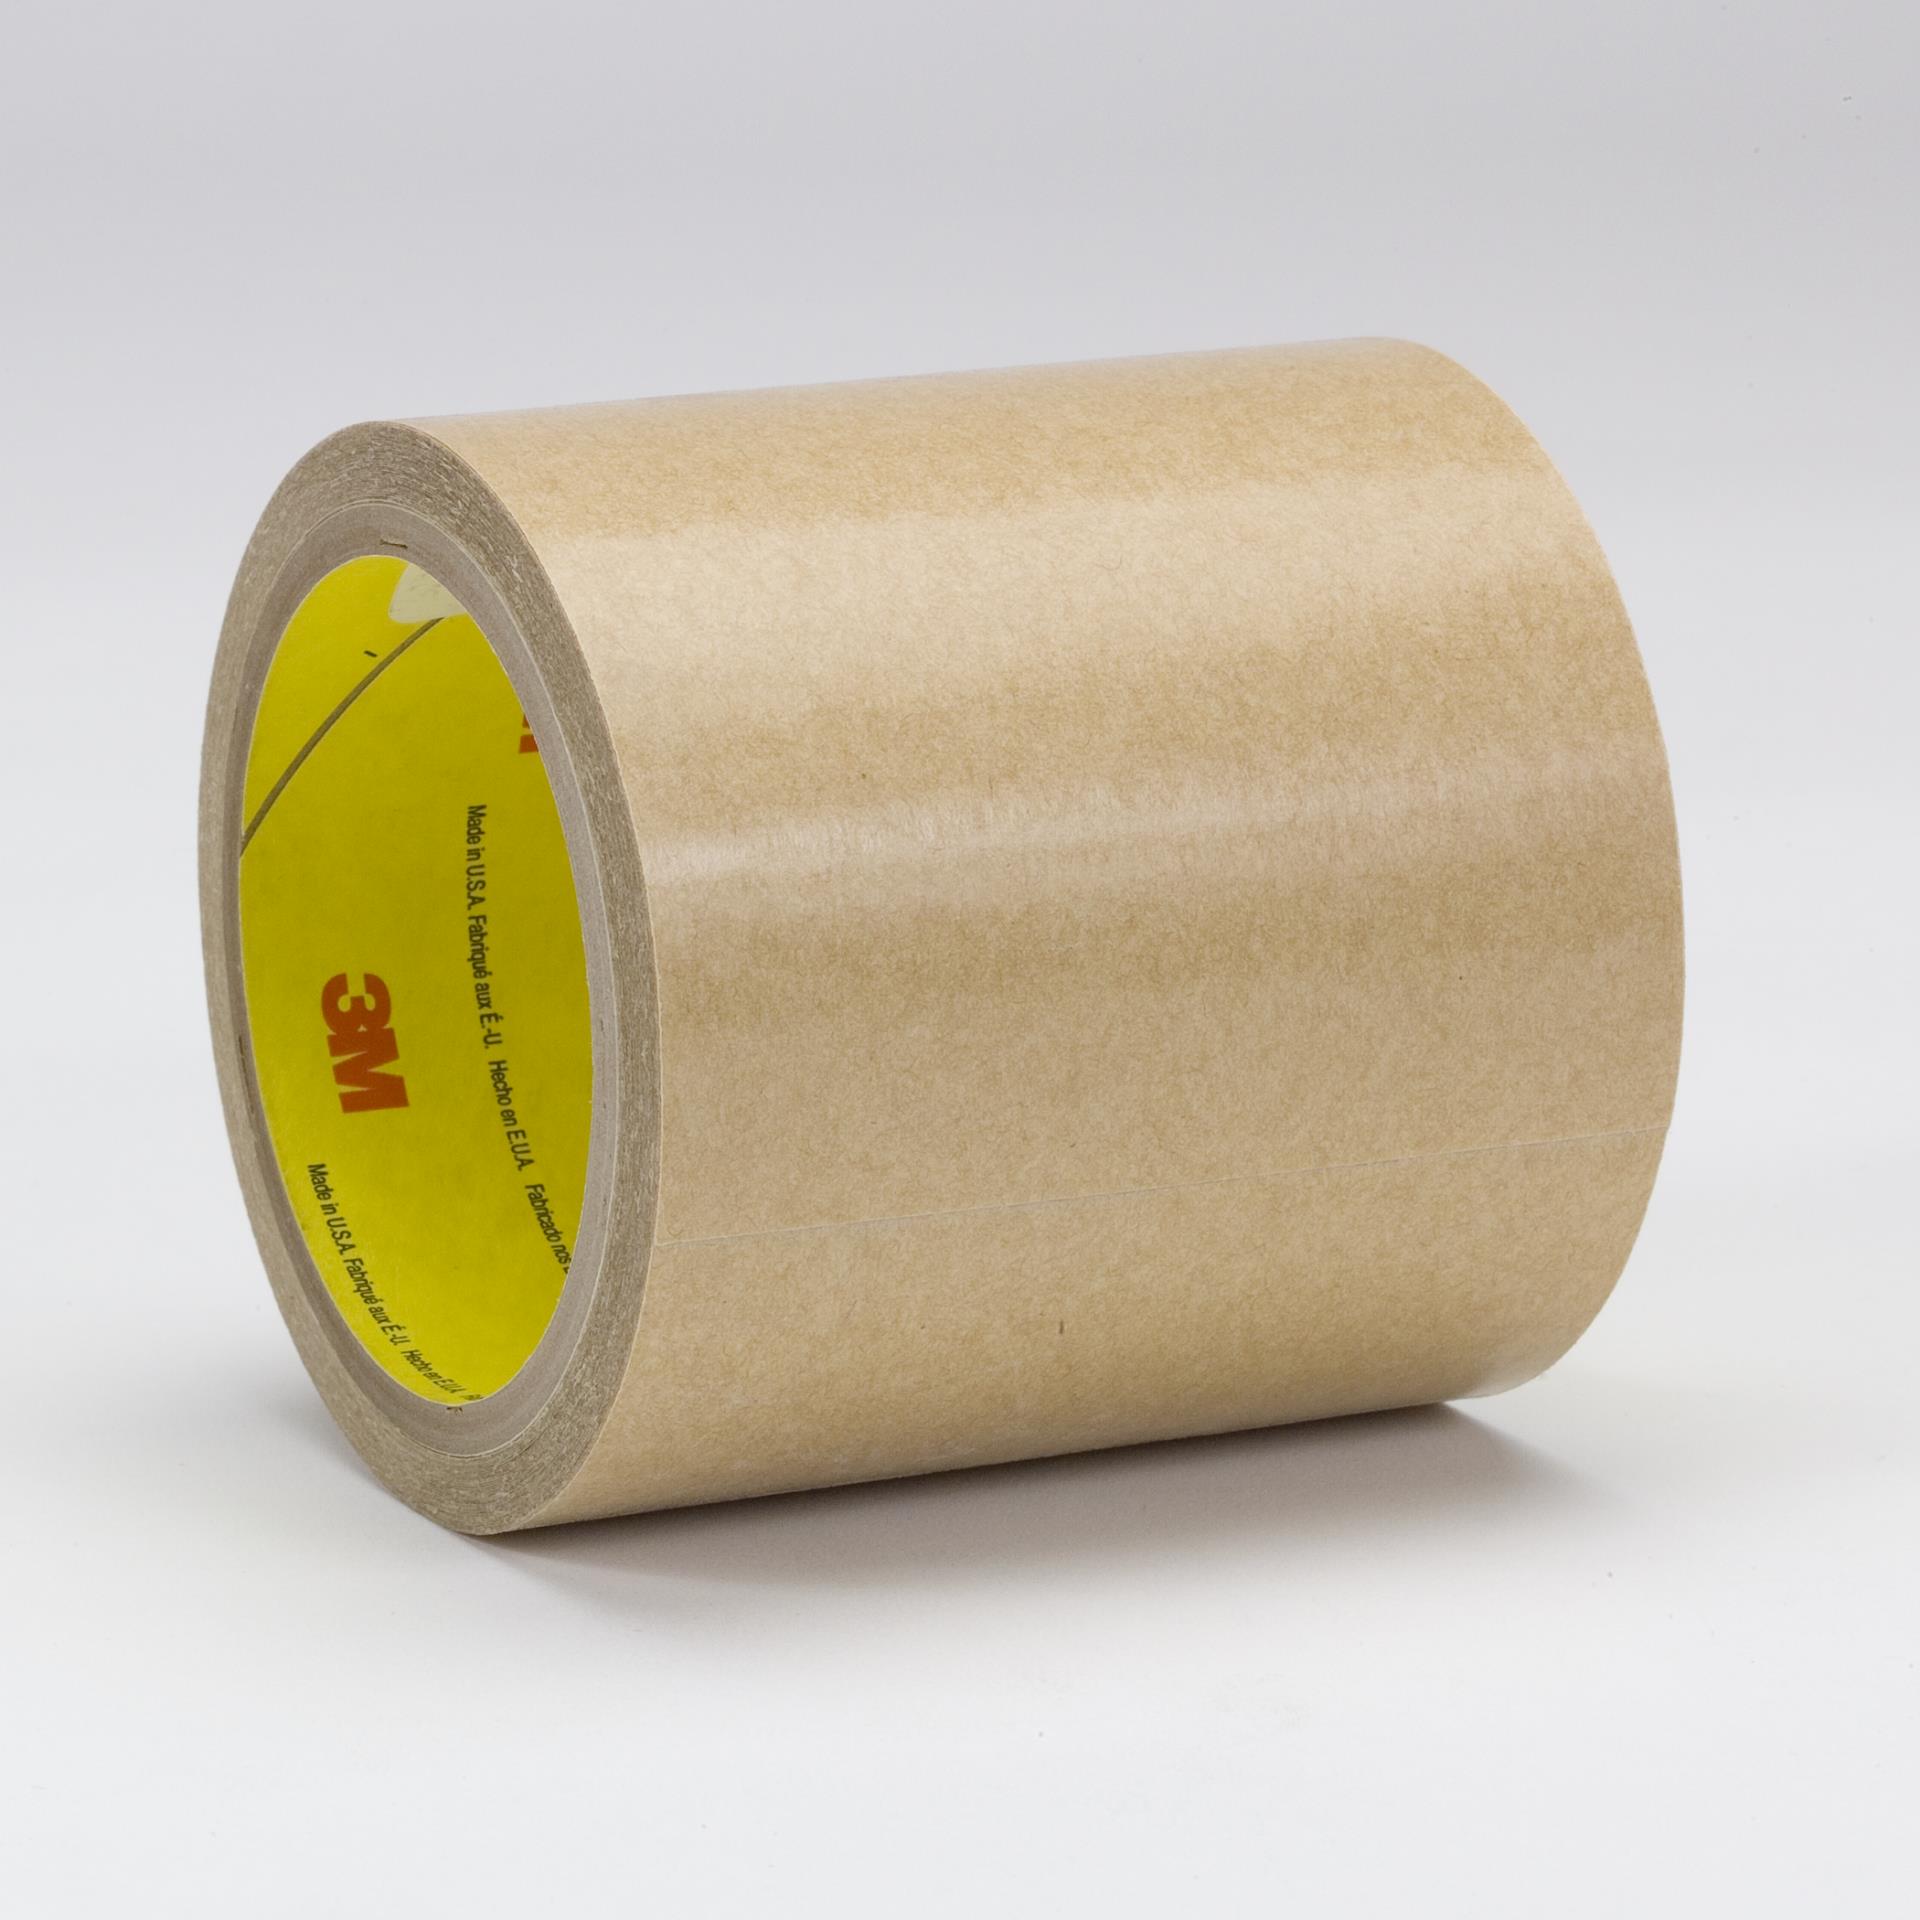 00021200193187 3M™ Adhesive Transfer Tape 9672, Clear, 24 in x 180 yd,  mil, roll per case Aircraft products adhesive-transfer-tapes 9381656